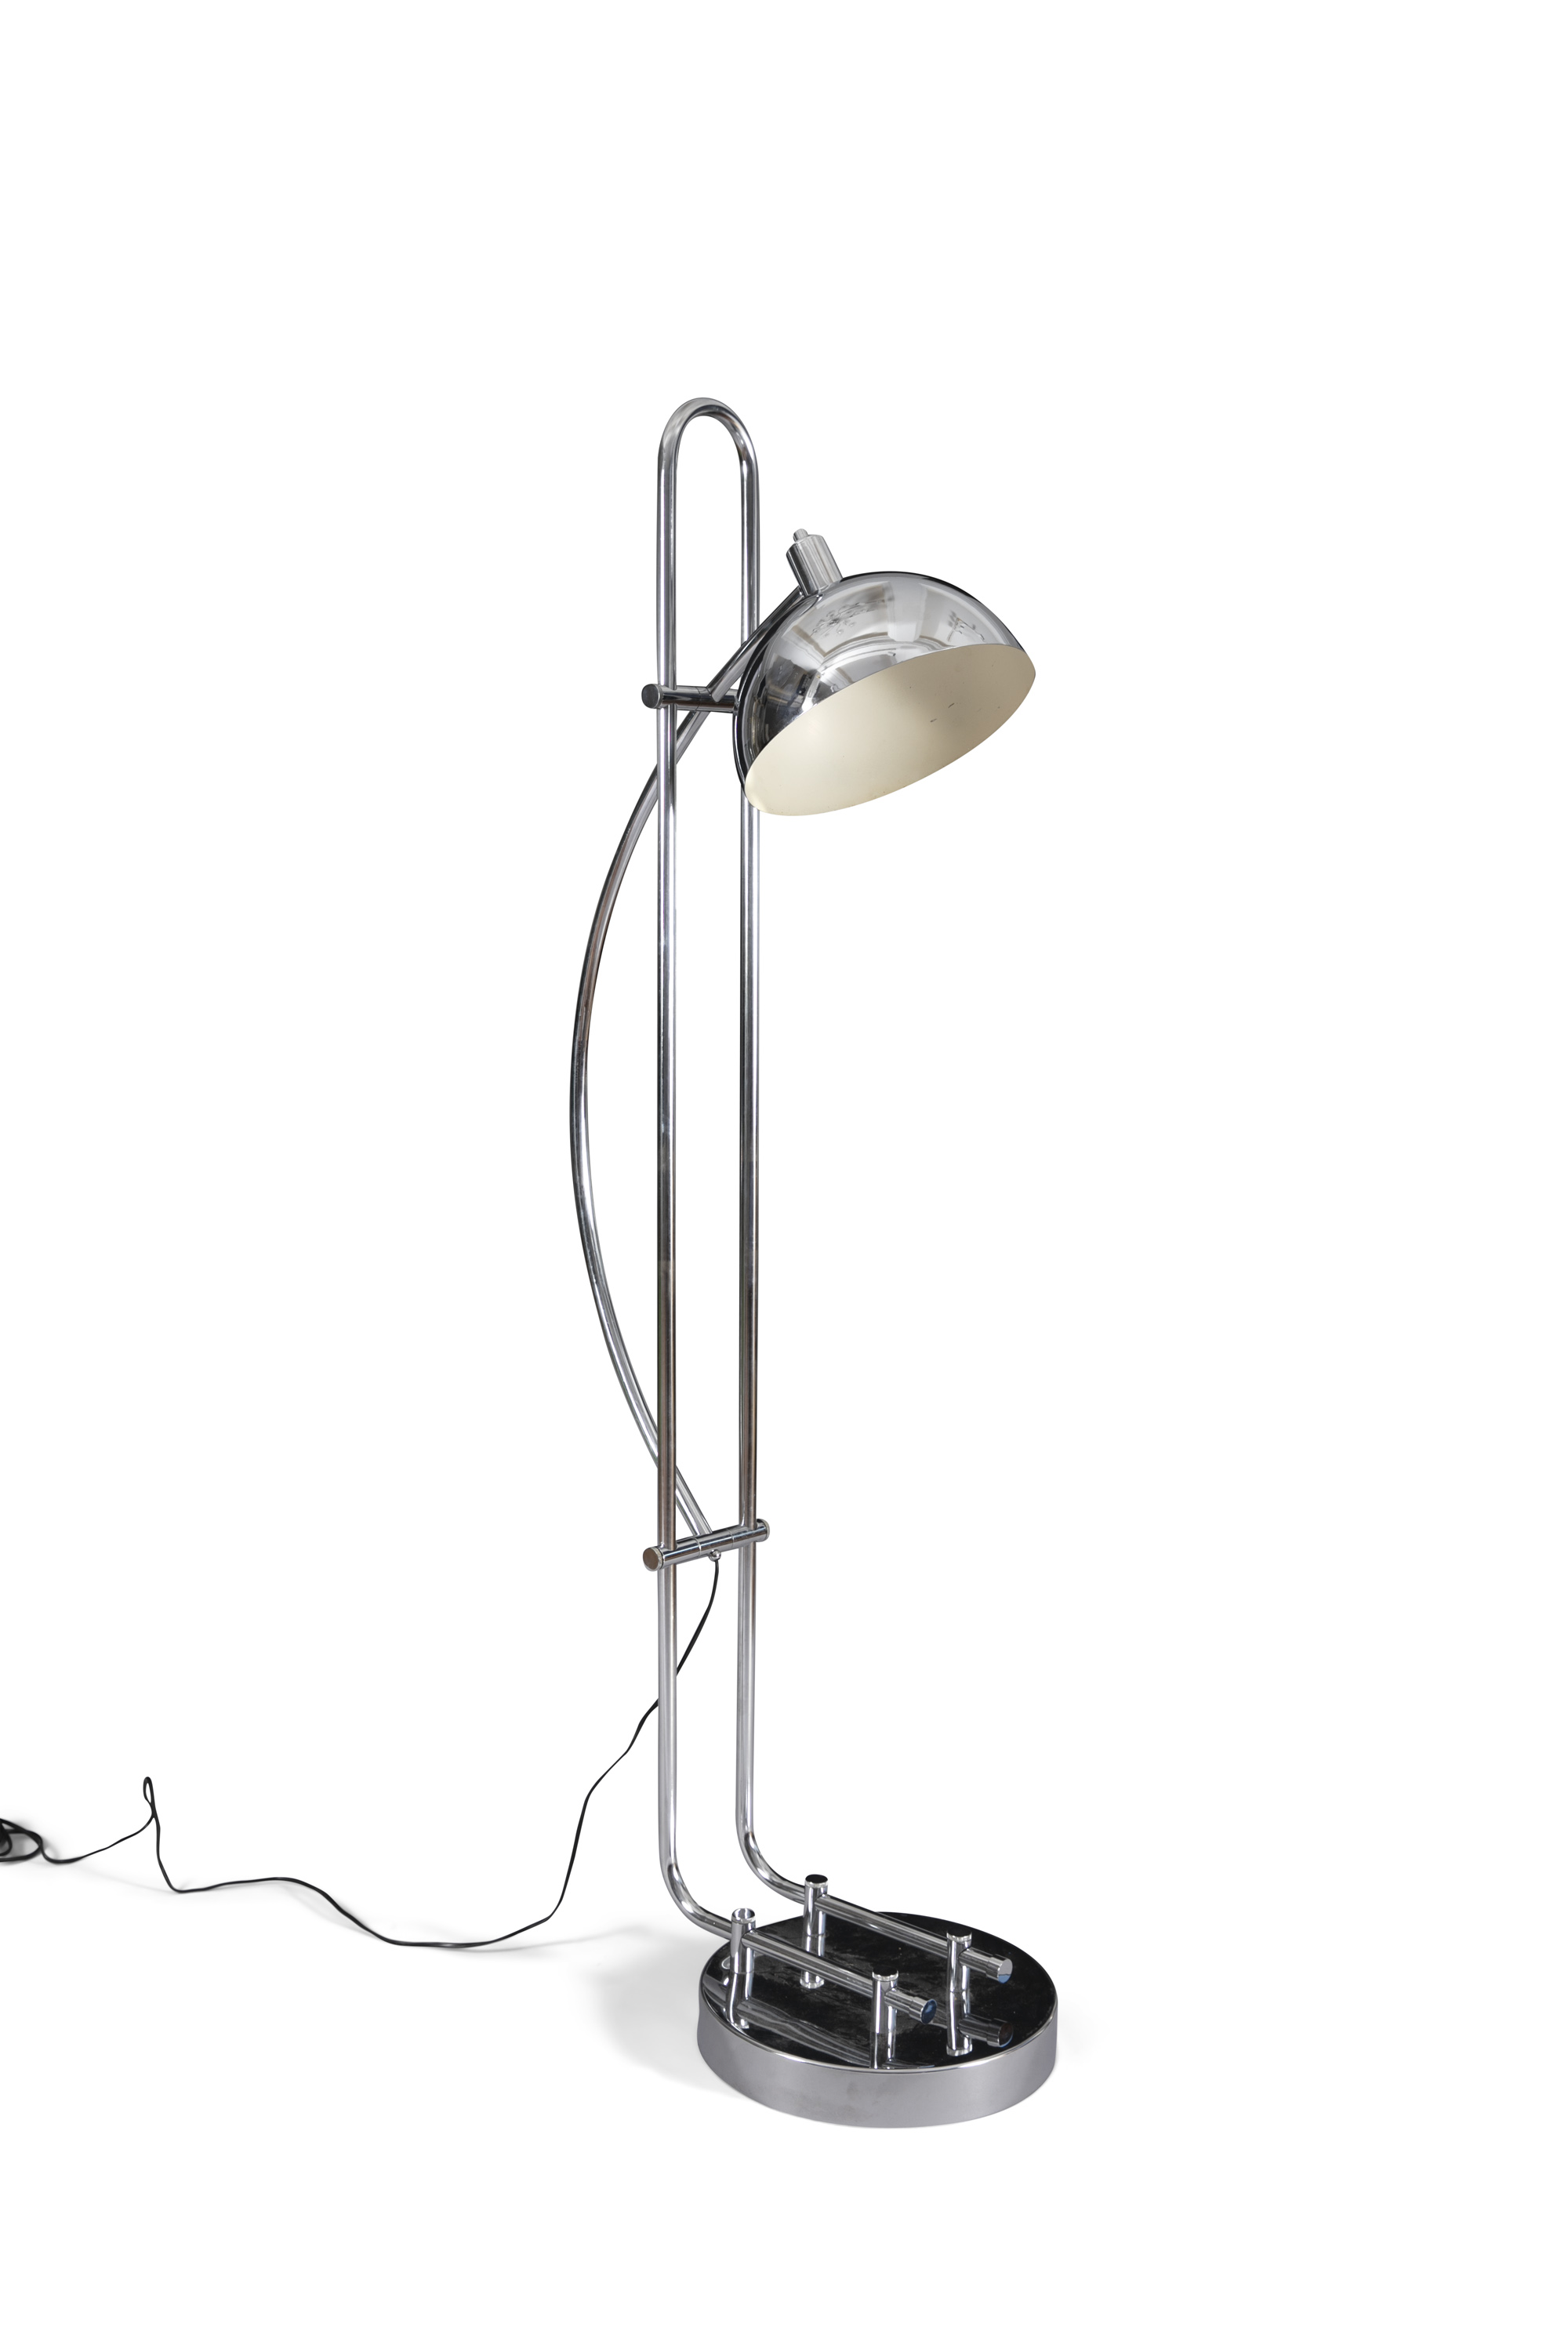 T-PONS A chrome T-Pons Arco floor lamp with adjustable tubular structure. c. 1970. 200 cm (high) - Image 6 of 7